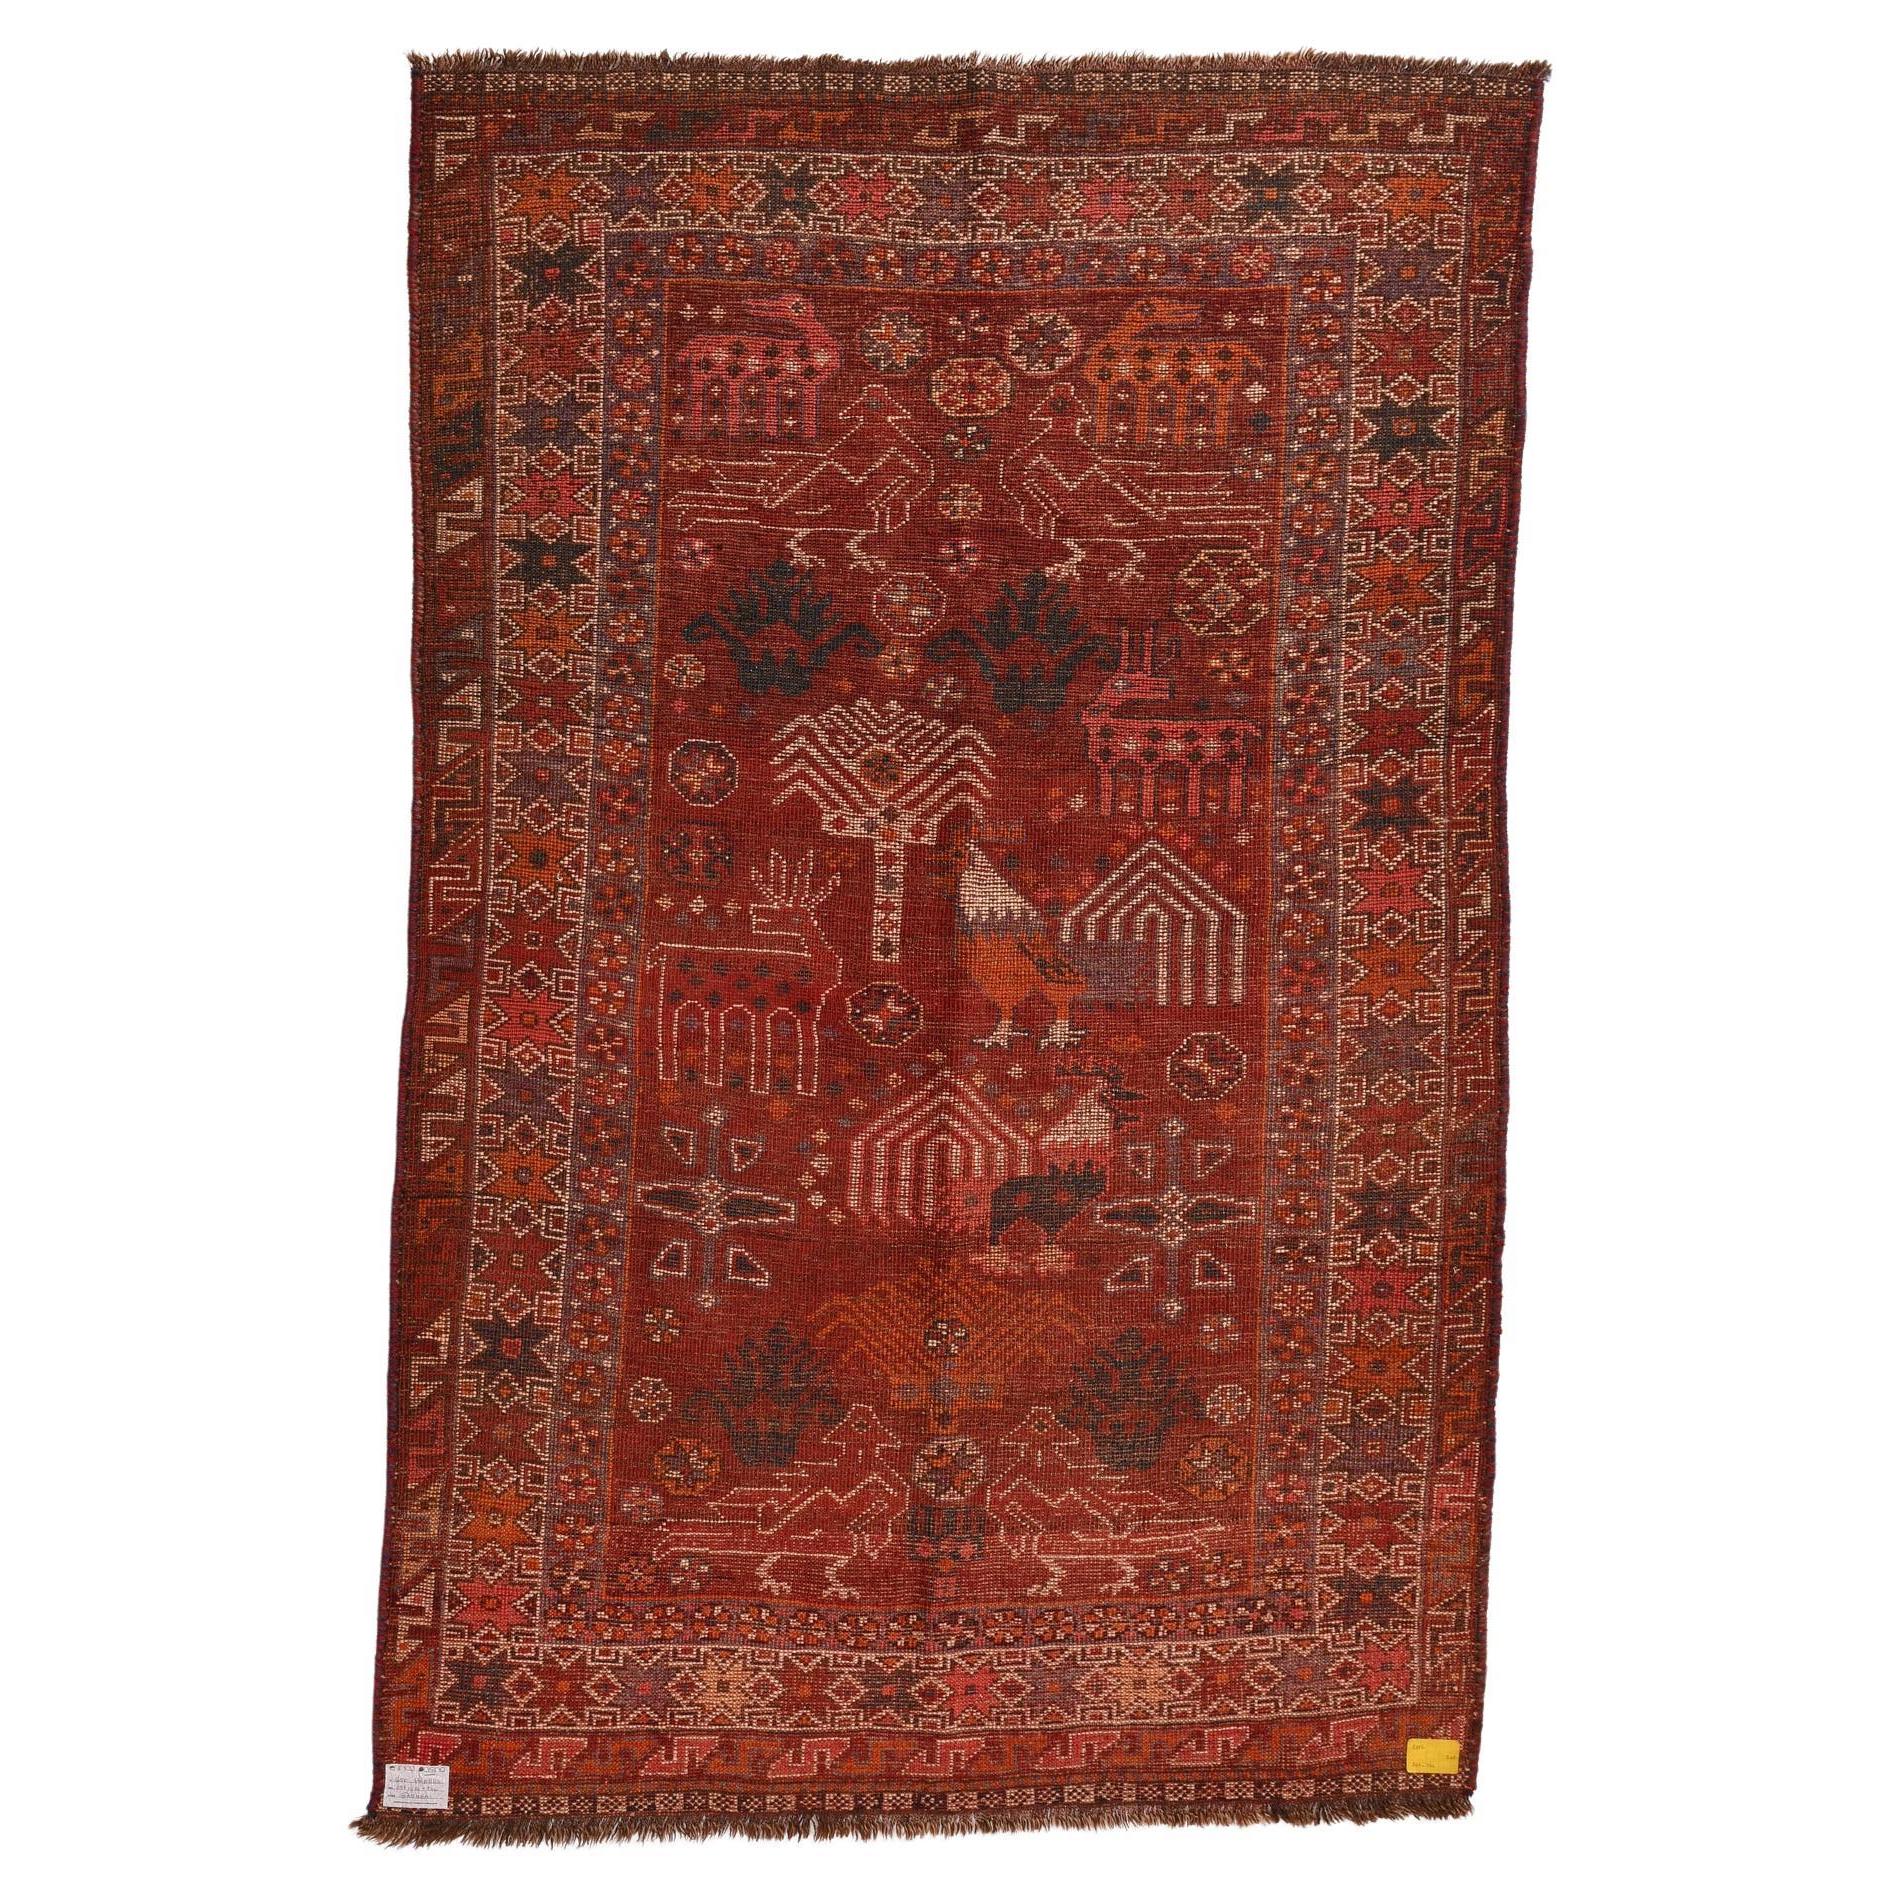 Other Old Nomadic Carpet from My Private Collection For Sale